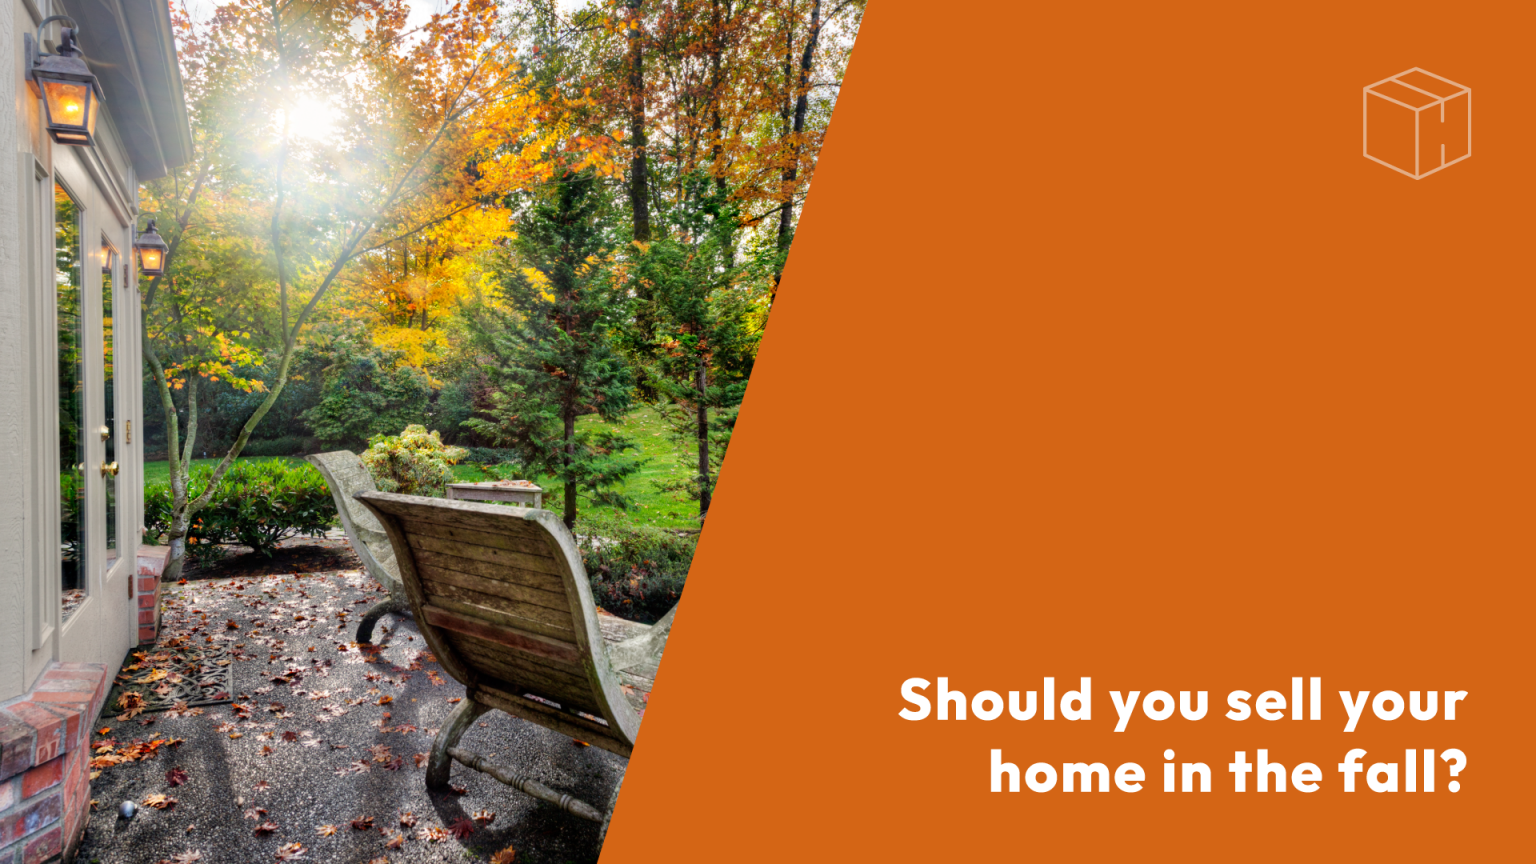 Should You Sell Your Home in the Fall?